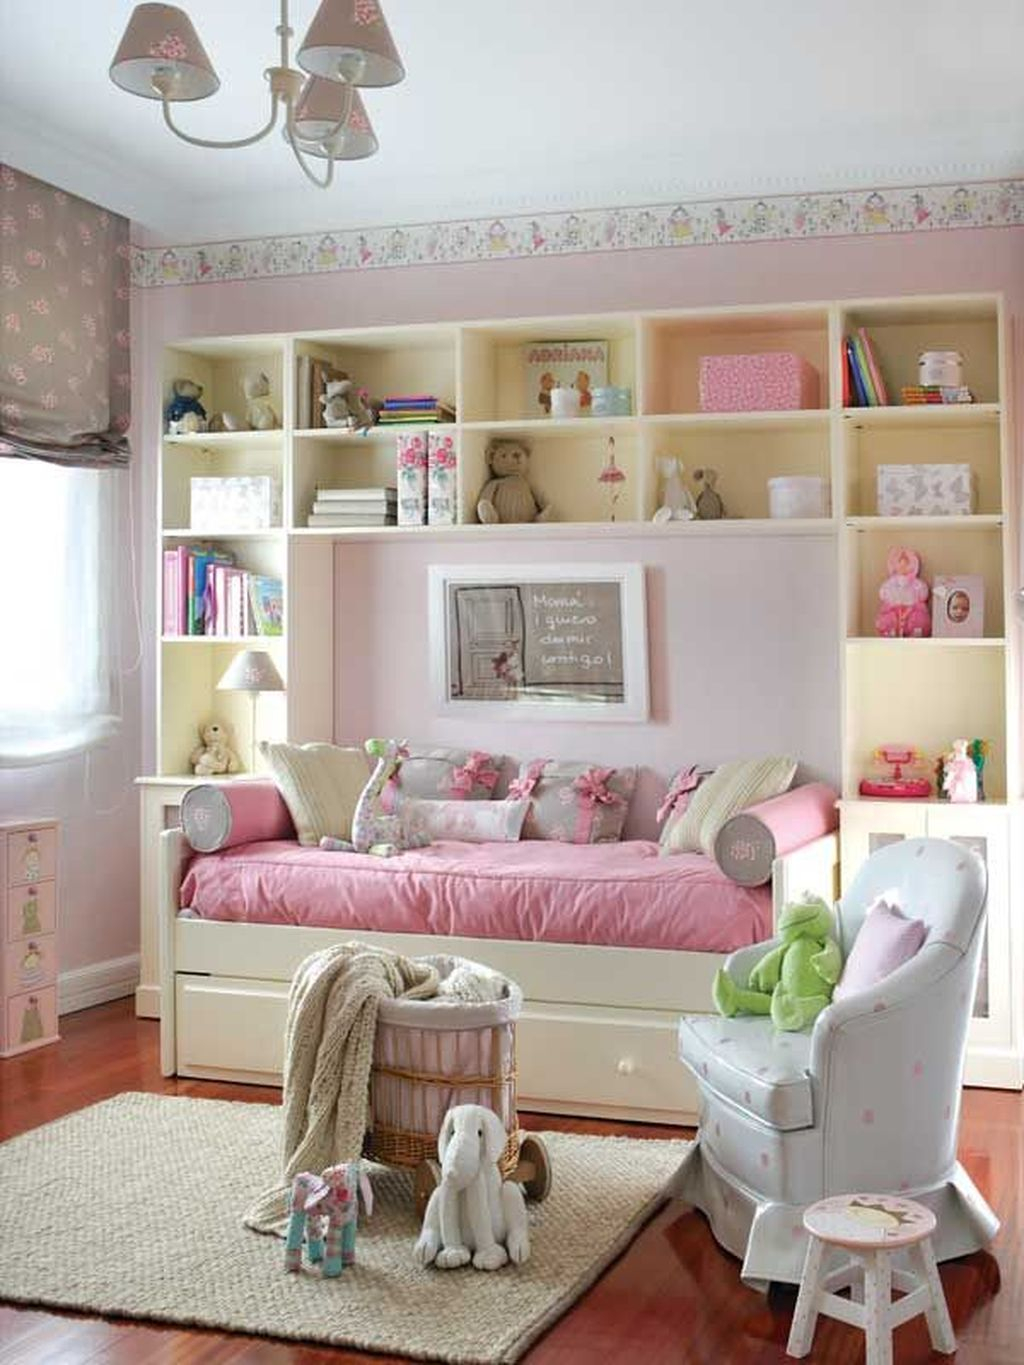 Cute And Cozy Bedroom Decor For Baby Girl01